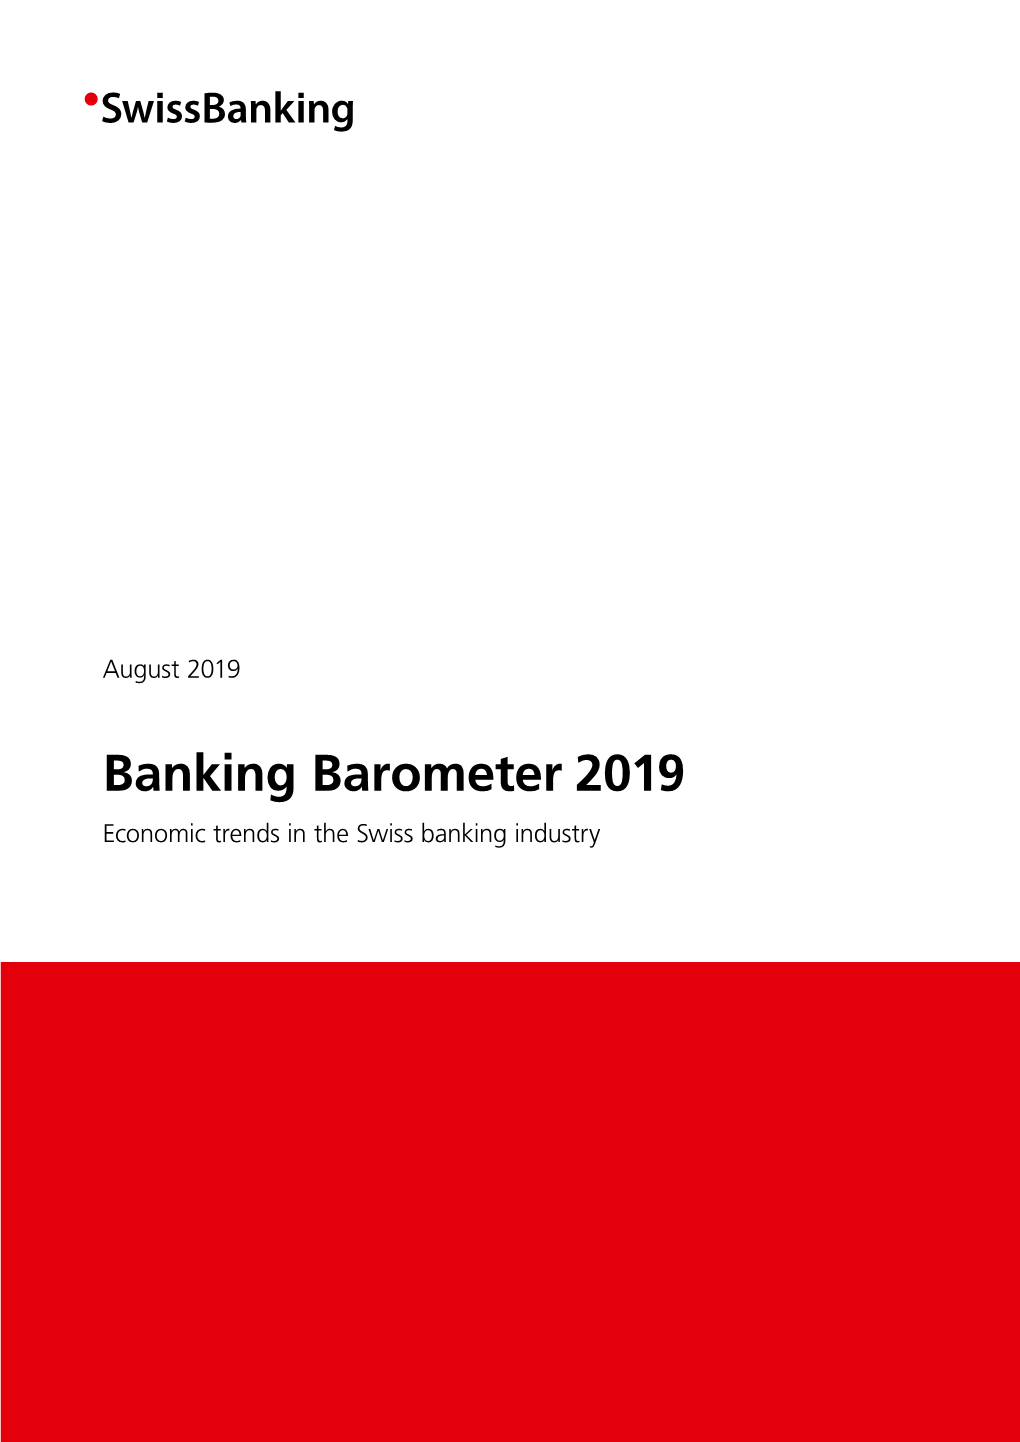 Banking Barometer 2019 Economic Trends in the Swiss Banking Industry ﻿ Content